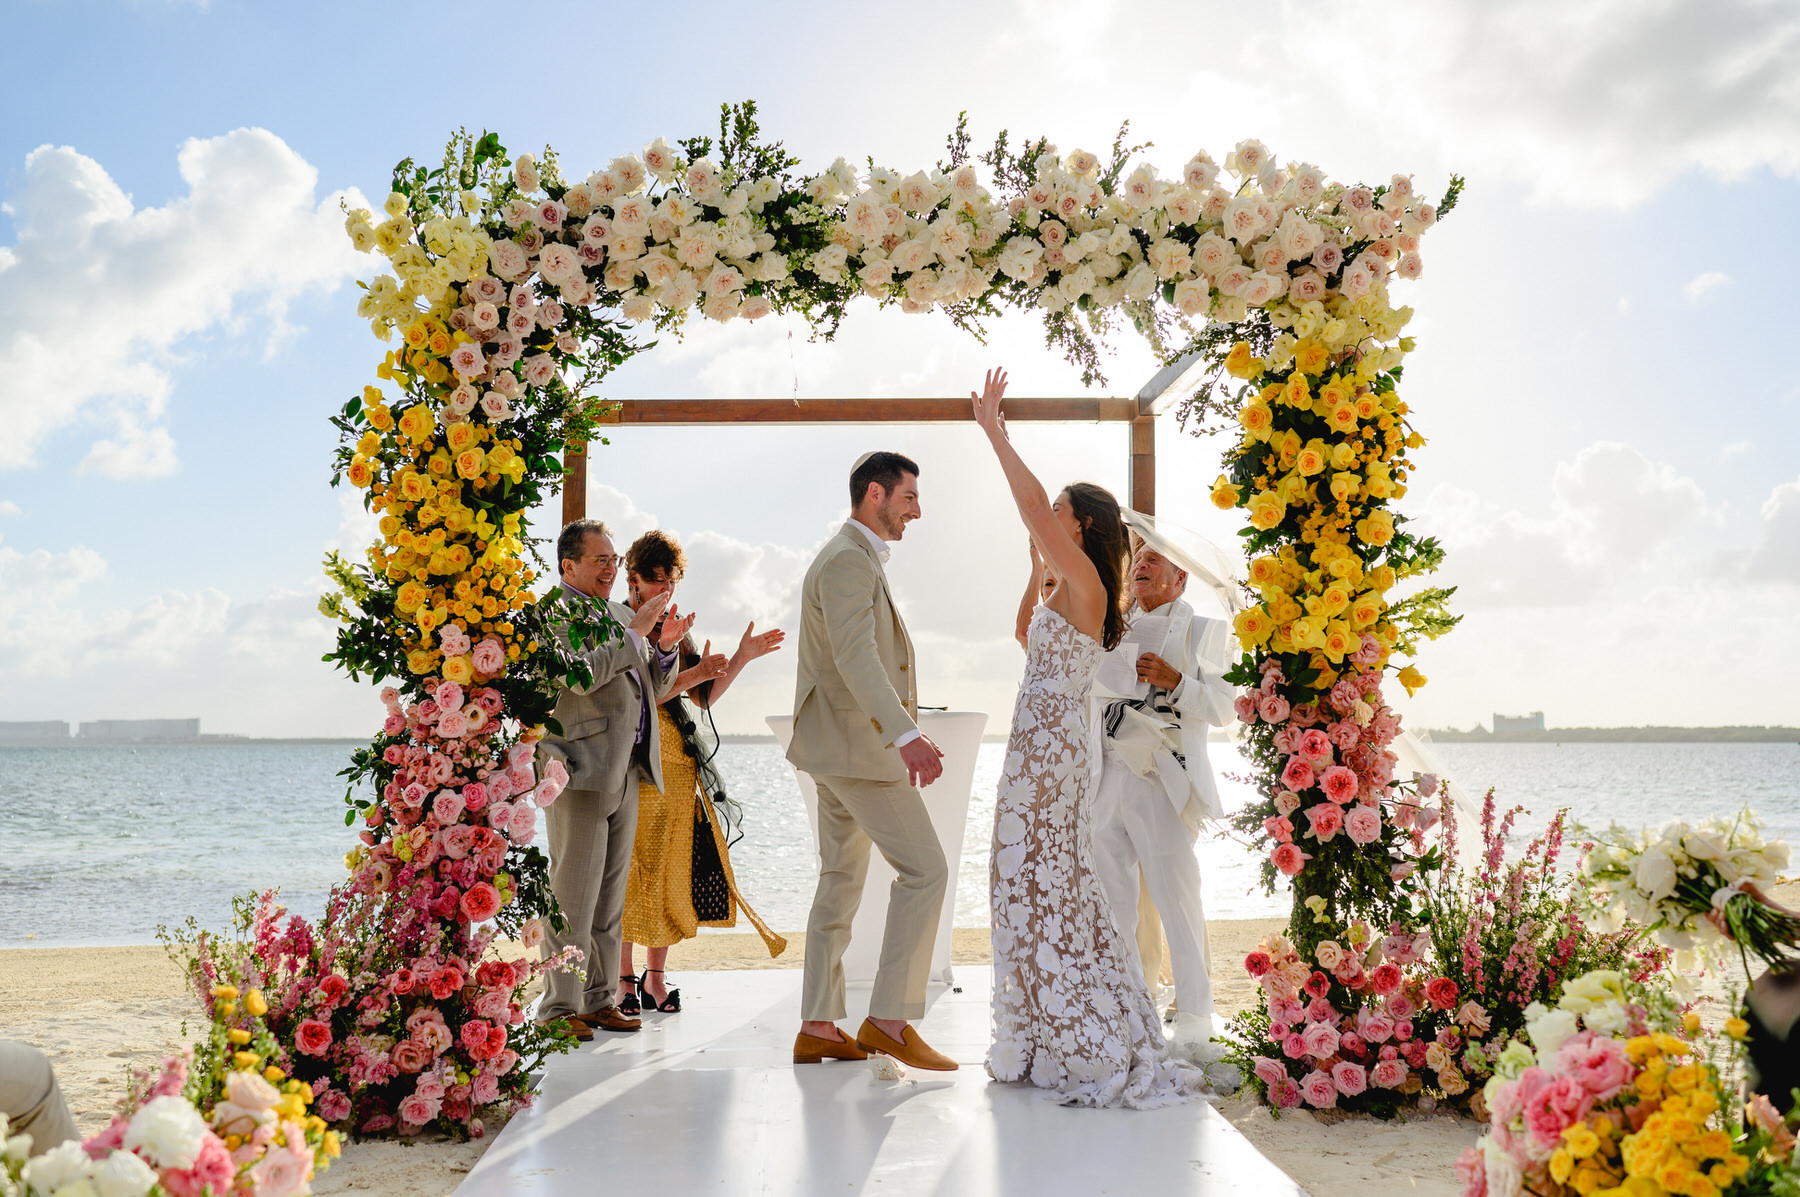 Beautiful outdoor wedding ceremony at Nizuc Resort and Spa Cancun